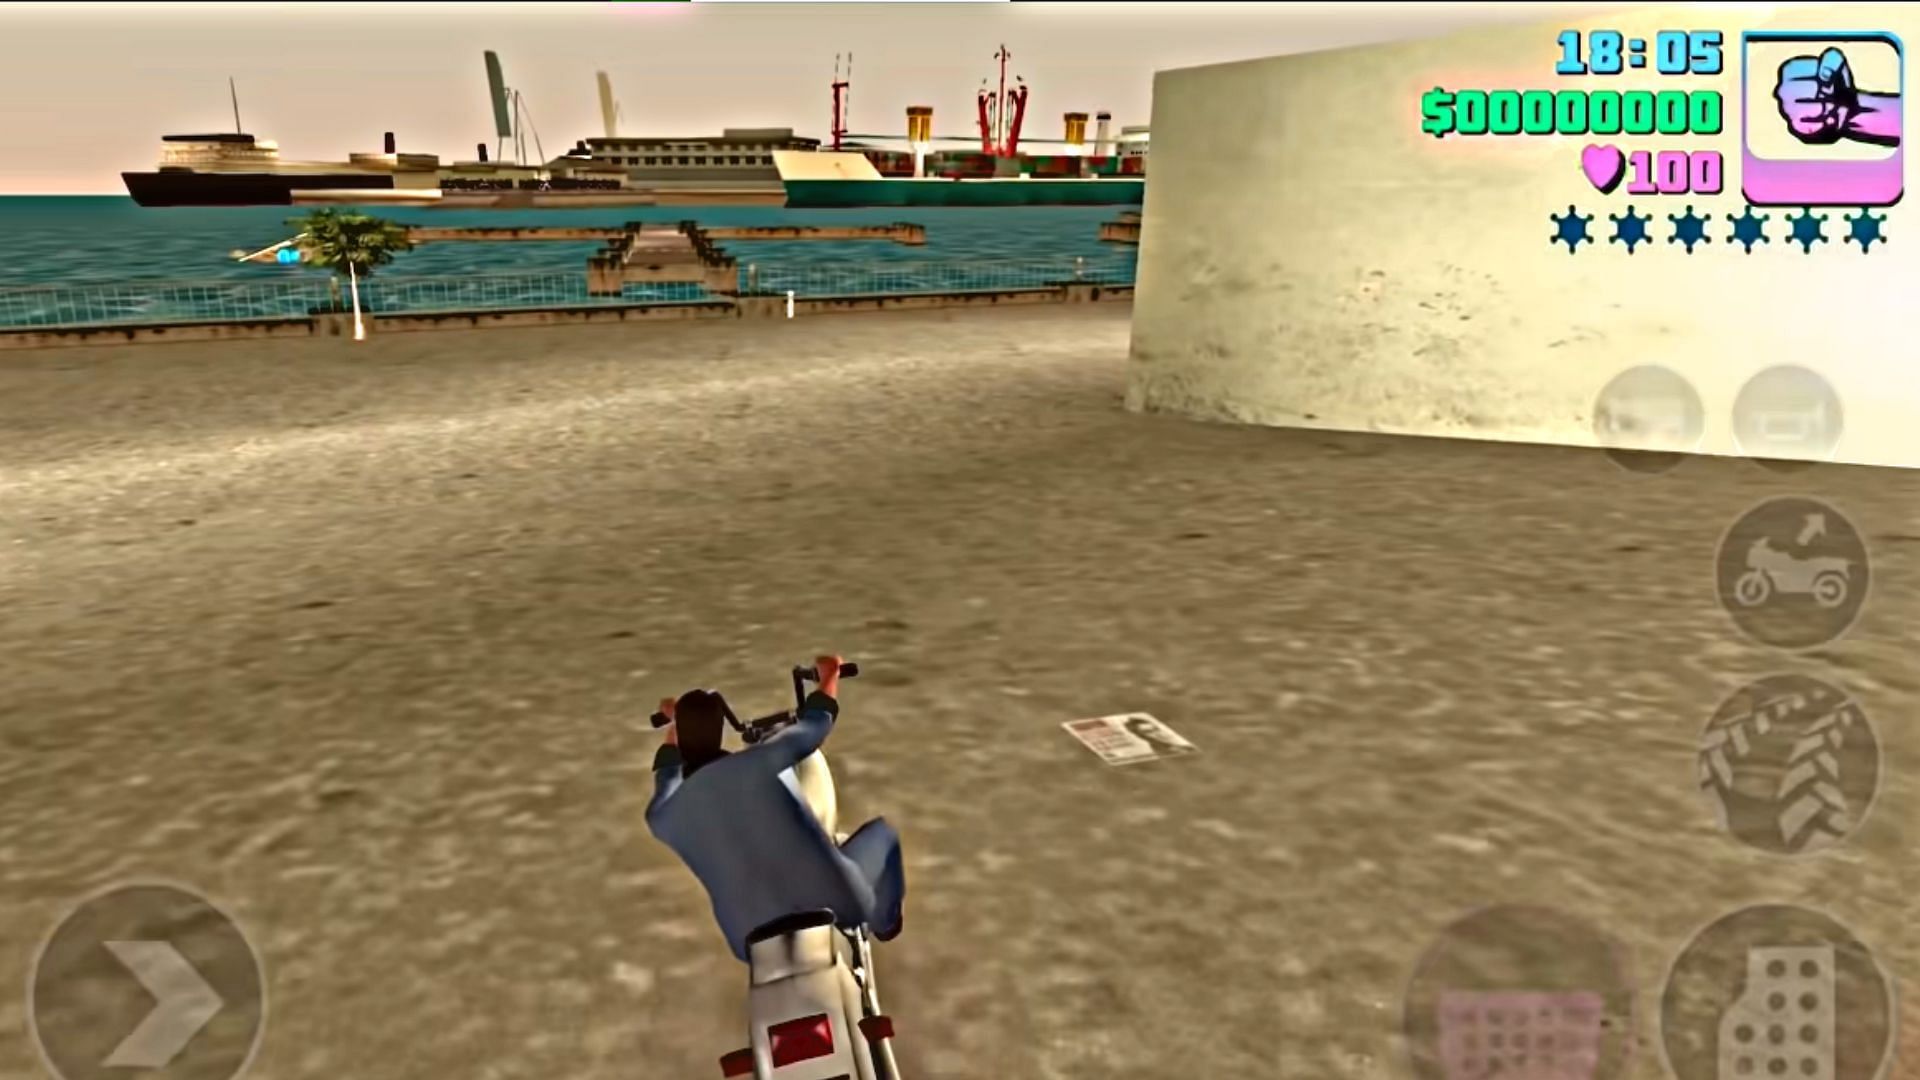 GTA Vice City Bangla Apk Download for Android 